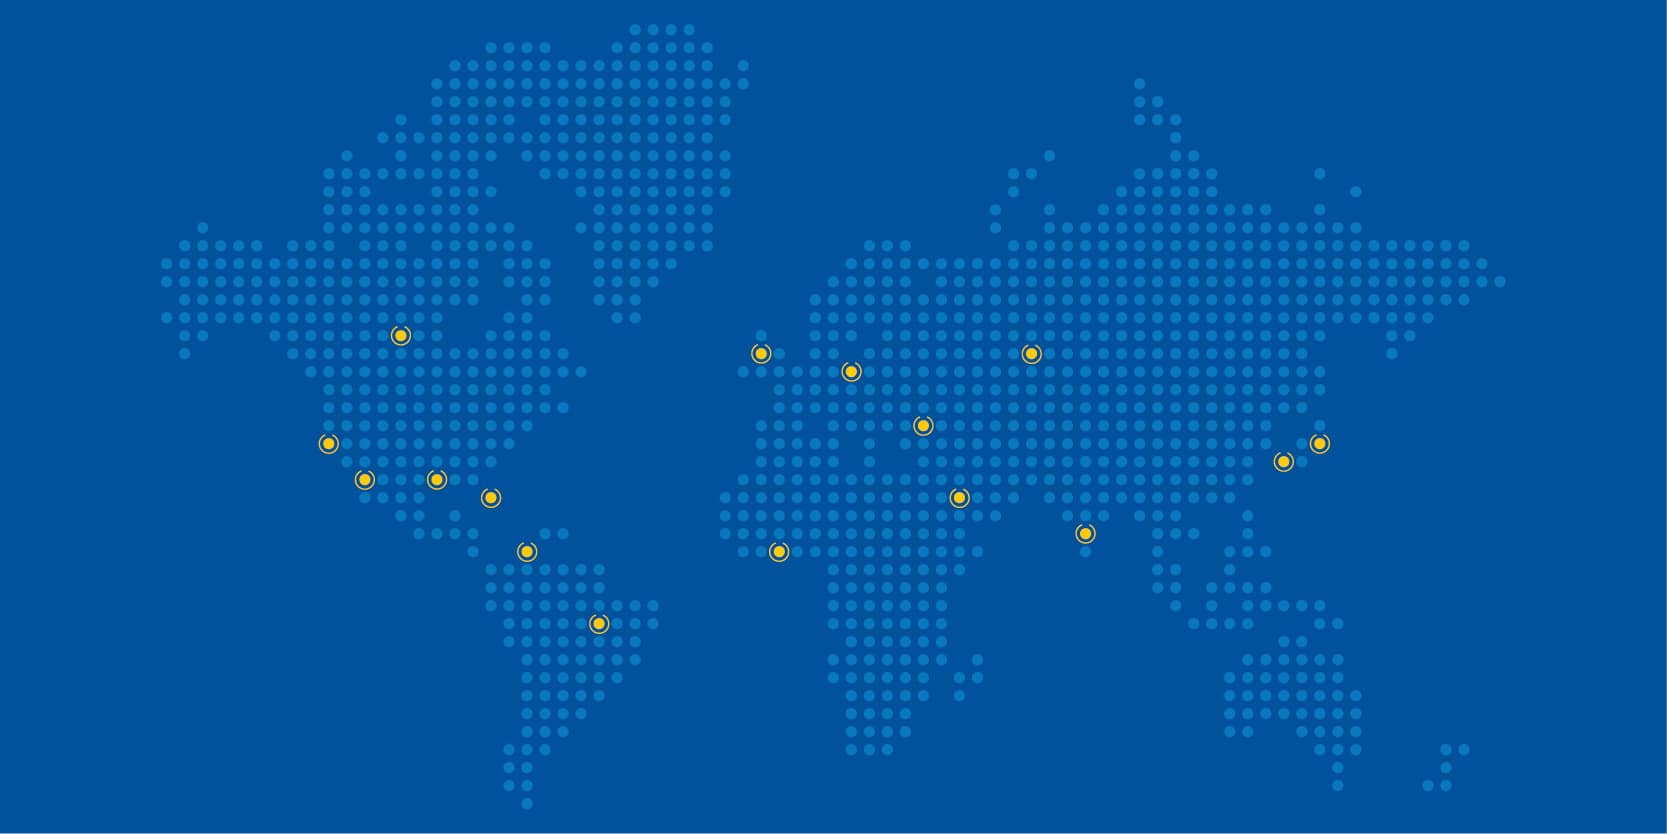 Map of the world depicted in blue with yellow dots to highlight locations